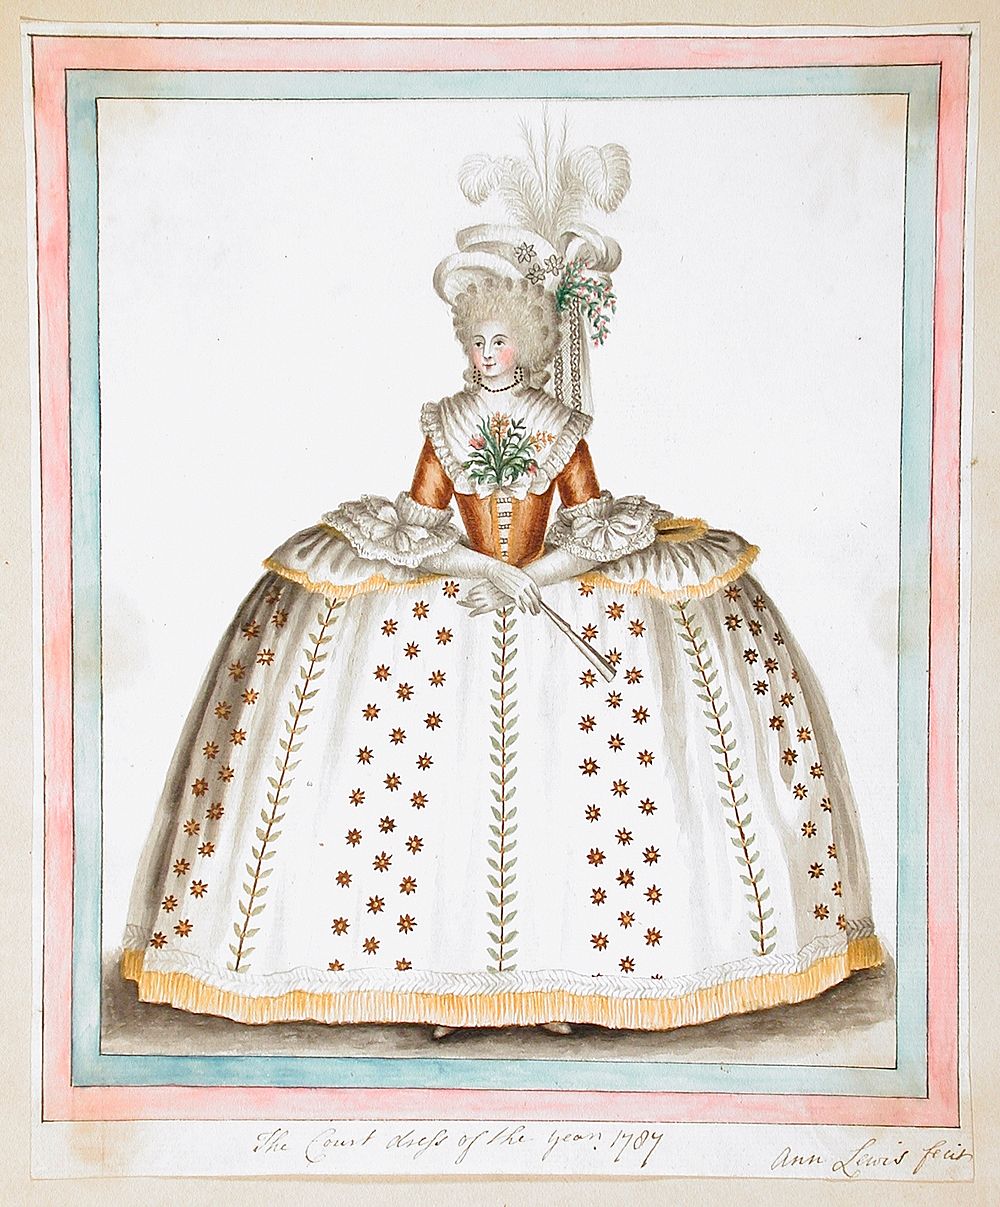 Collection of English Original Watercolour Drawings:  The Court Dress of the Year 1784 by Ann Frankland Lewis